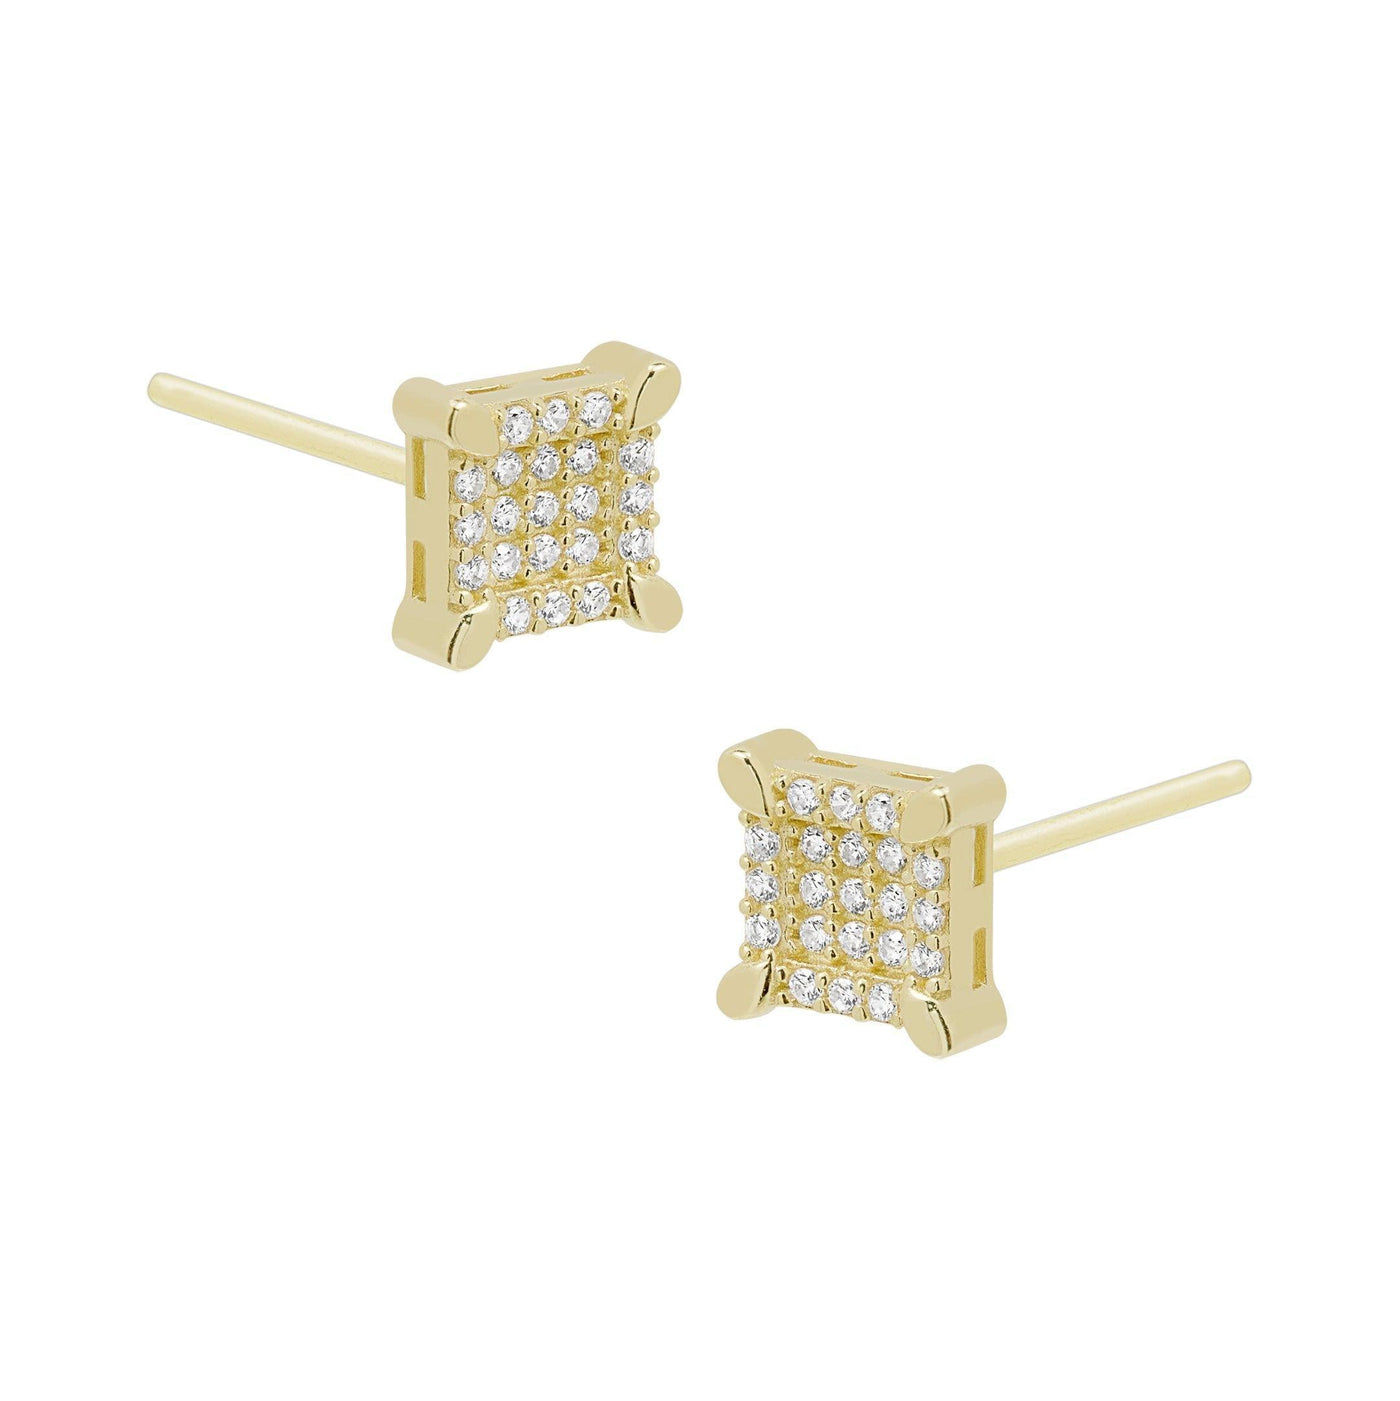 1/4" Small CZ Square Stud Earrings Solid 10K Yellow Gold - bayamjewelry